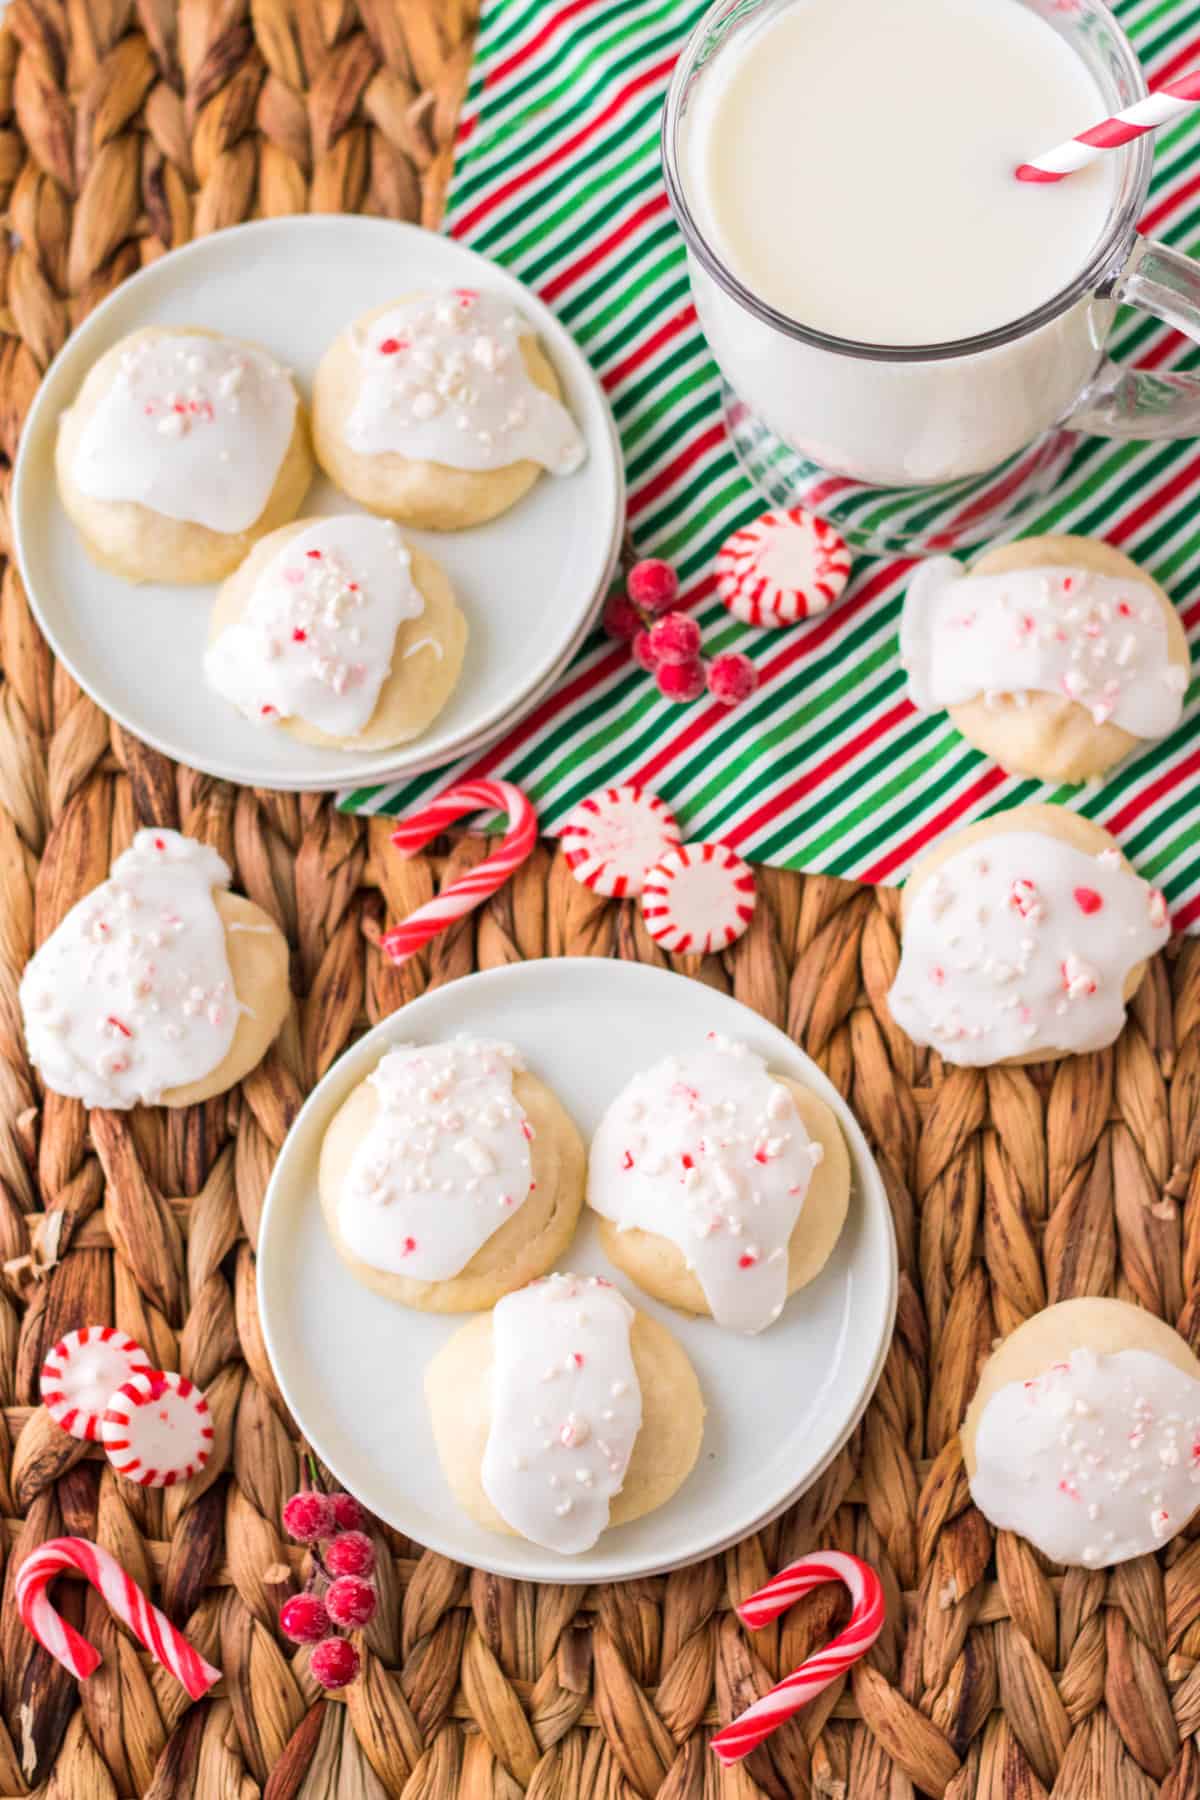 Frosted peppermint cookies on white plates and on straw tray beside a glass of milk.